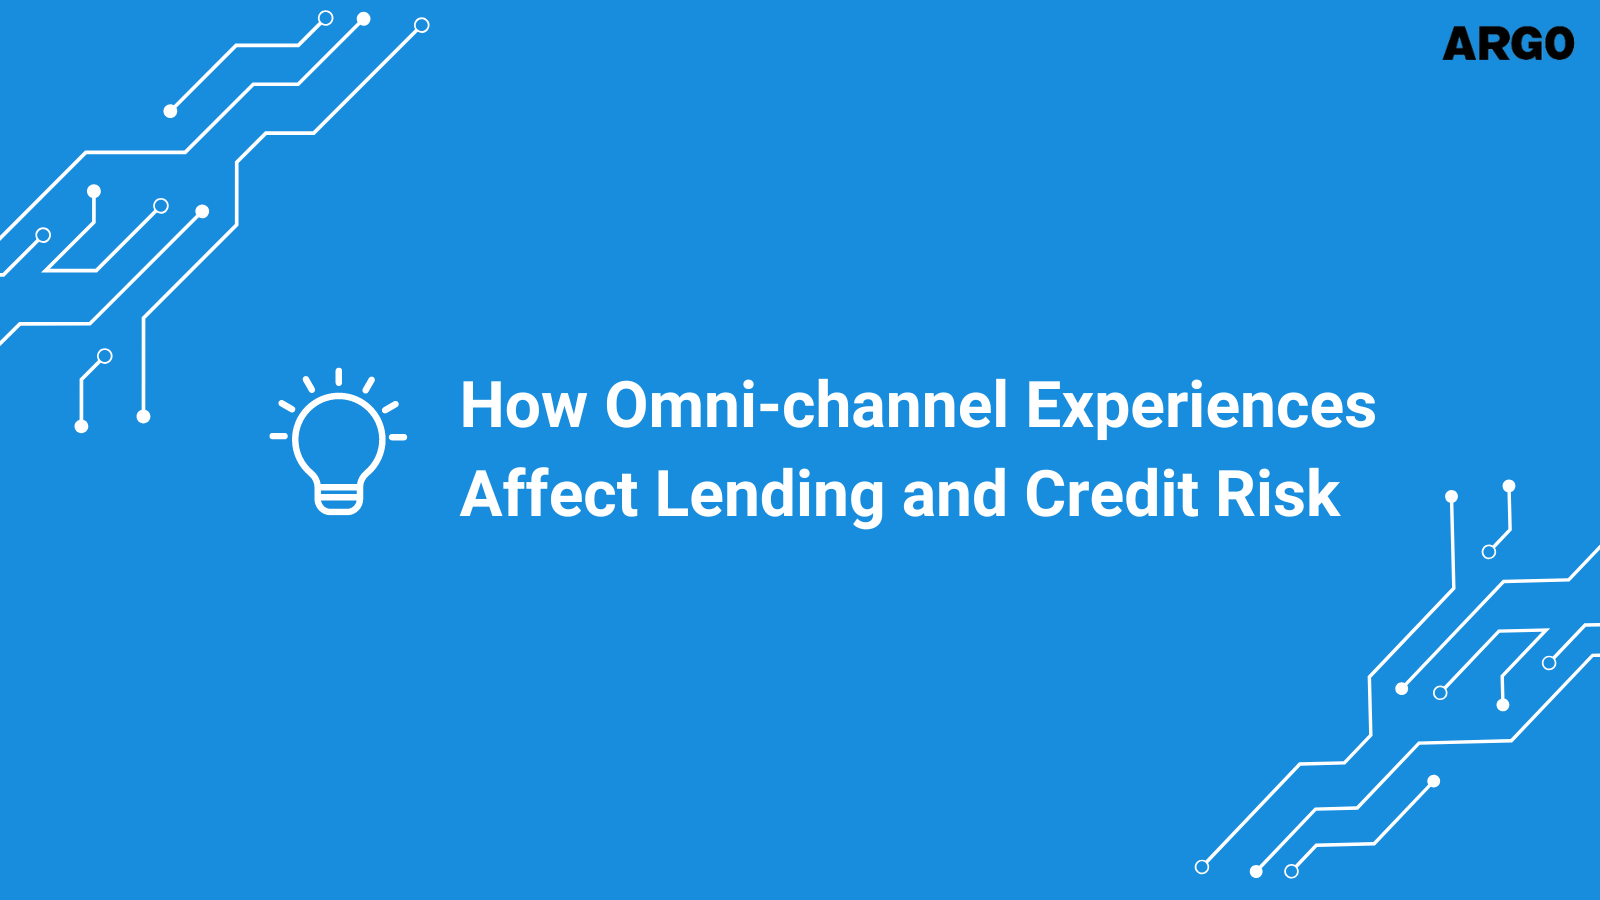 How Omni-channel Experiences Affect Lending and Credit Risk